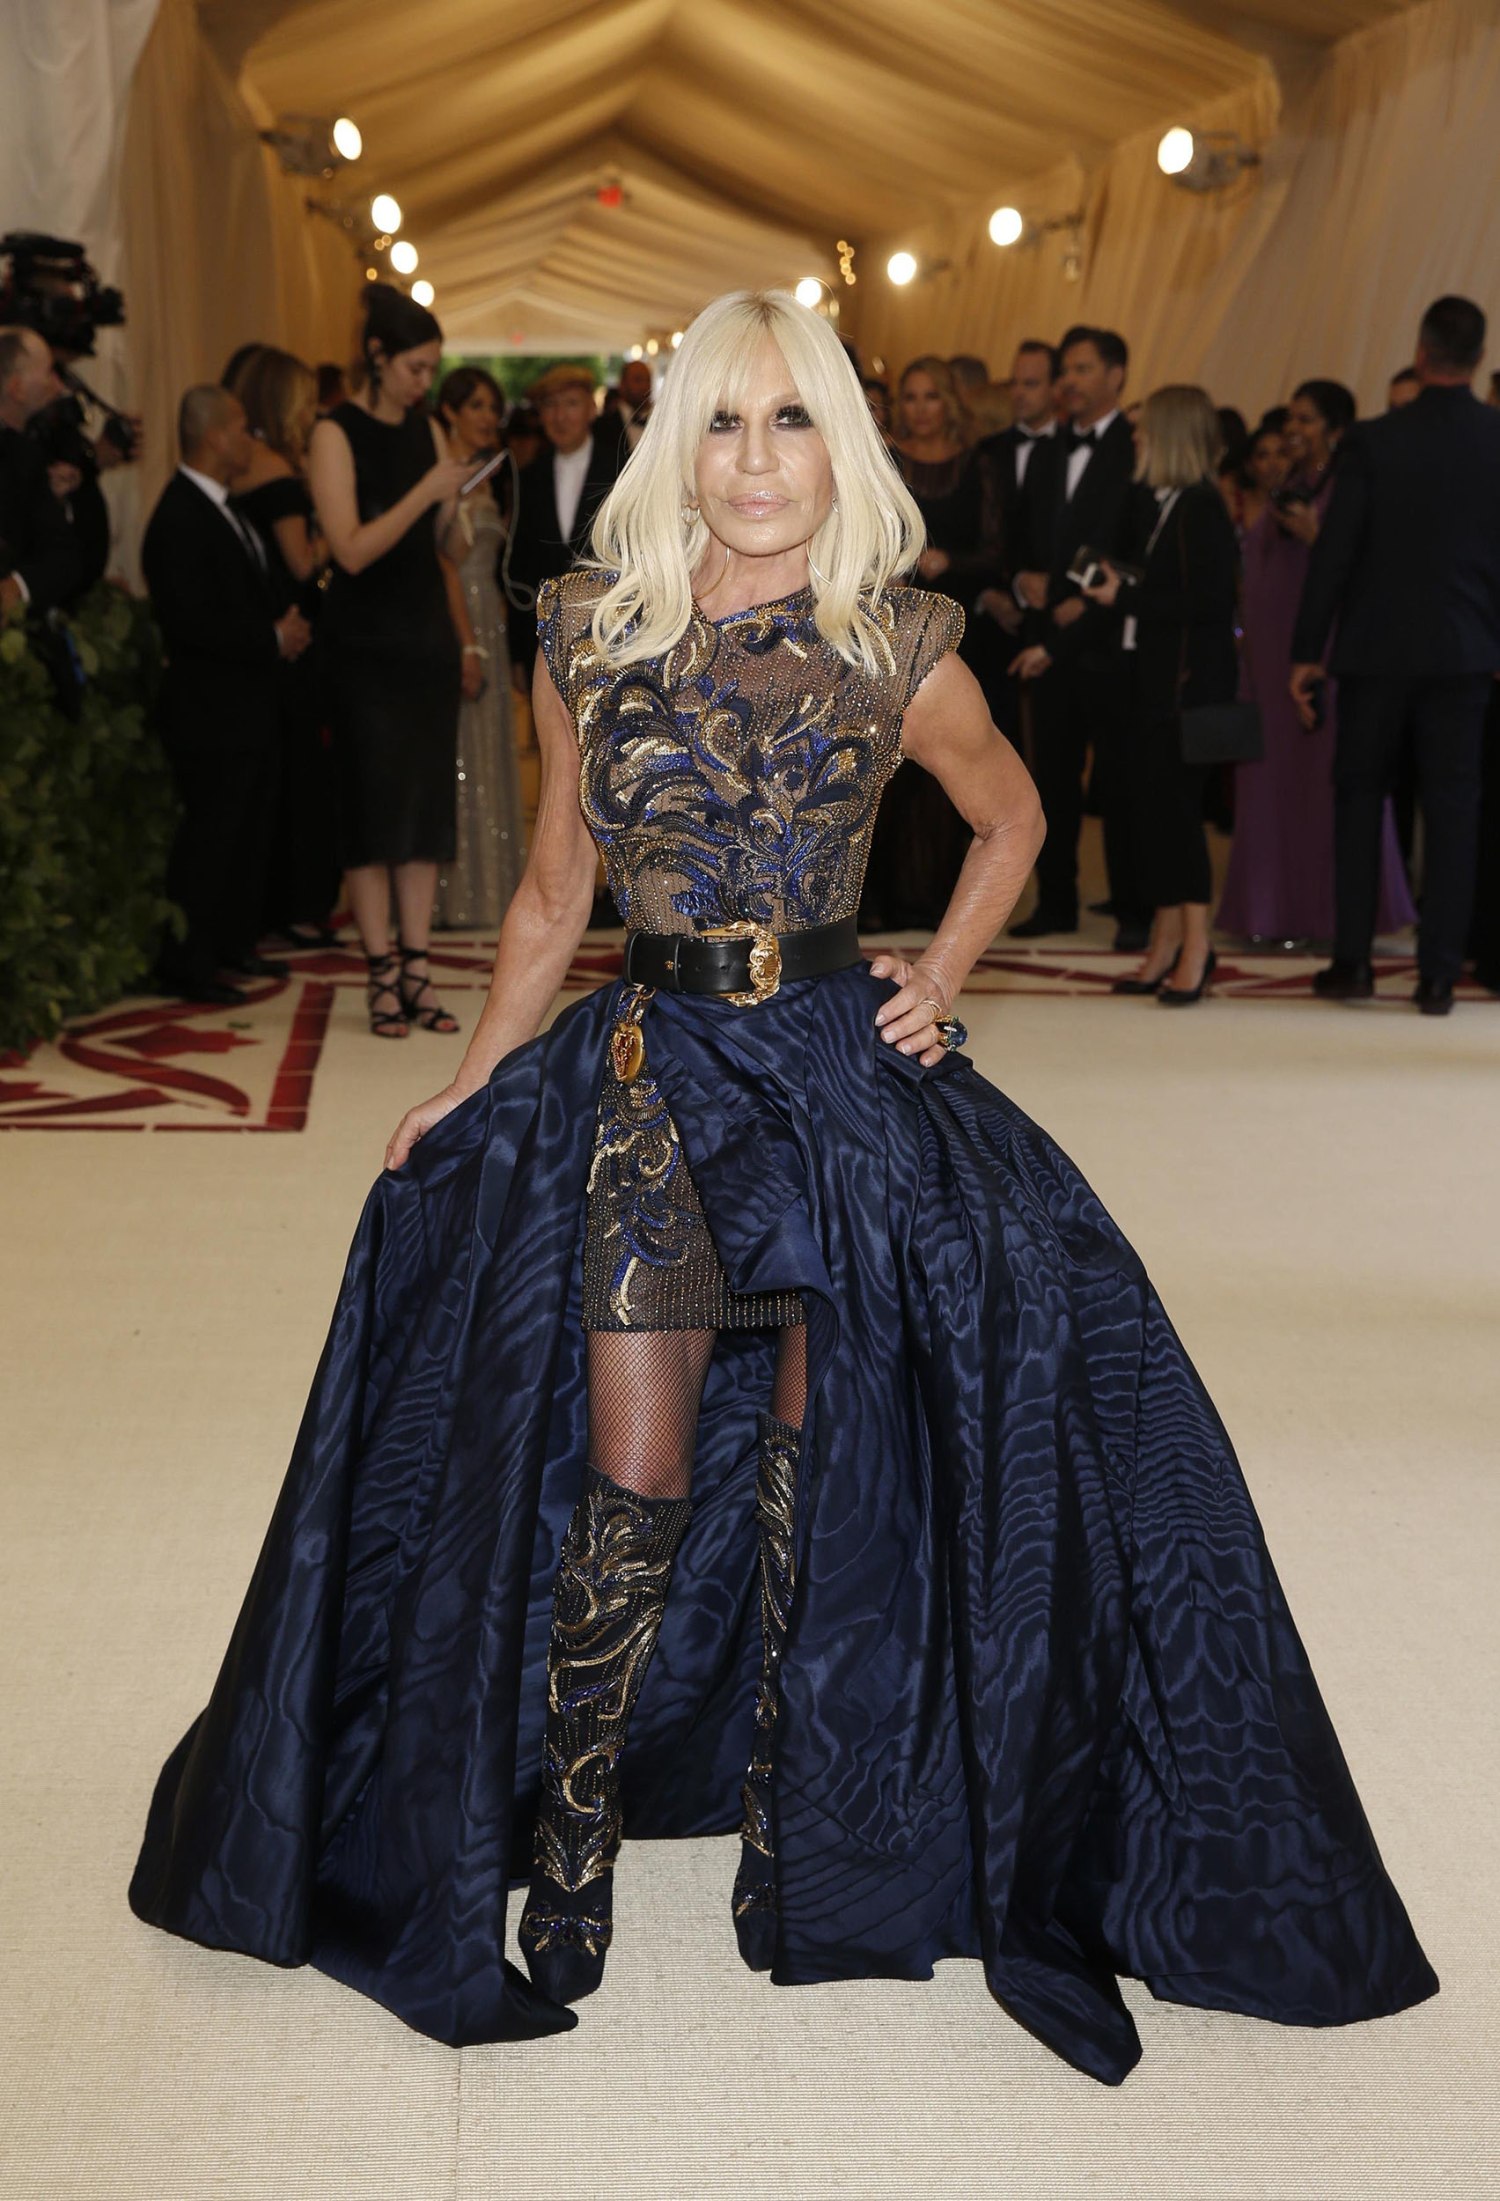 Heavenly Bodies, Sinful Looks: The Sexiest Celebrities at the 2018 MET Gala